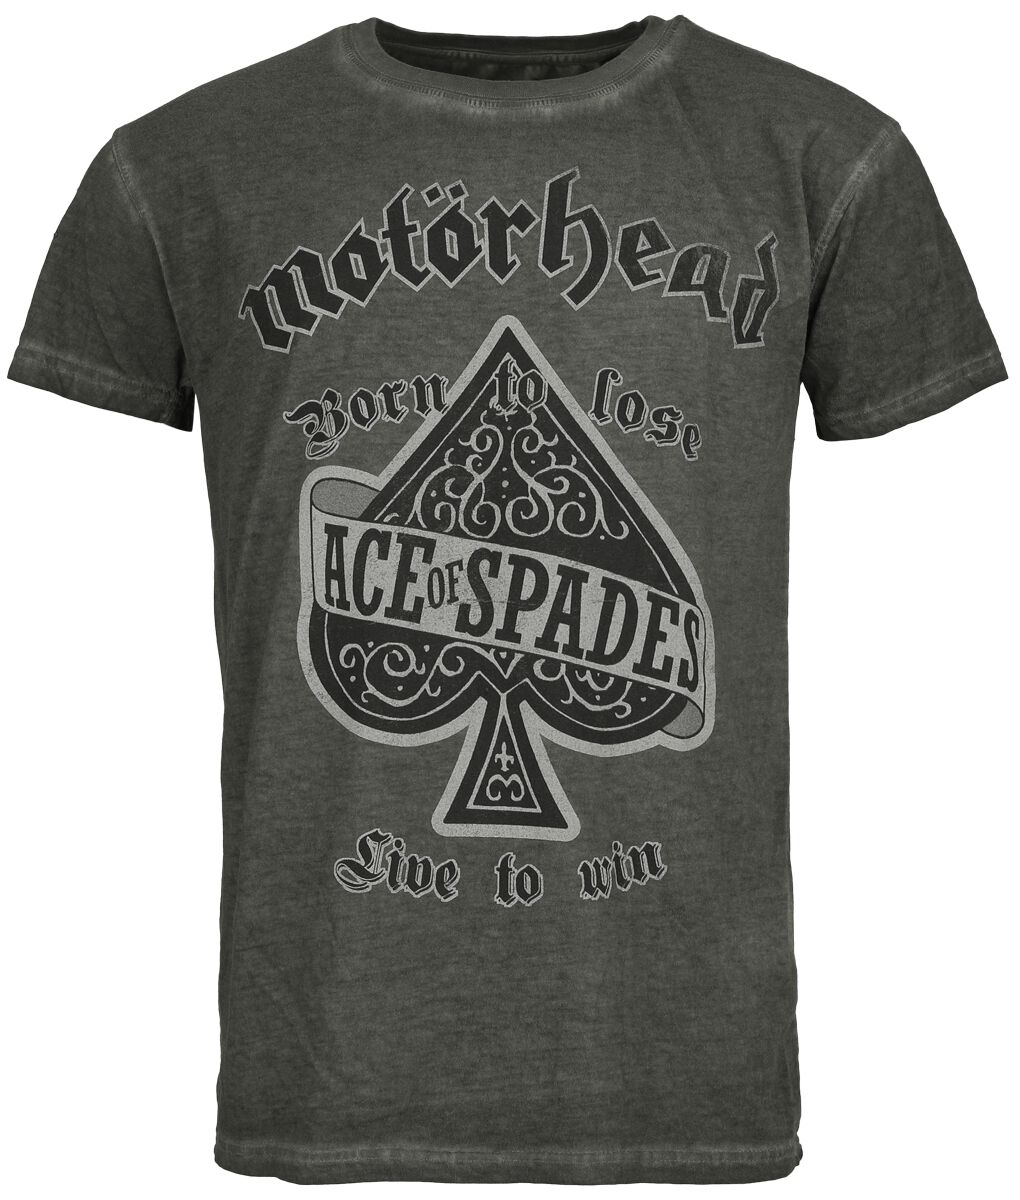 Motörhead Ace Of Spades T-Shirt anthrazit in S